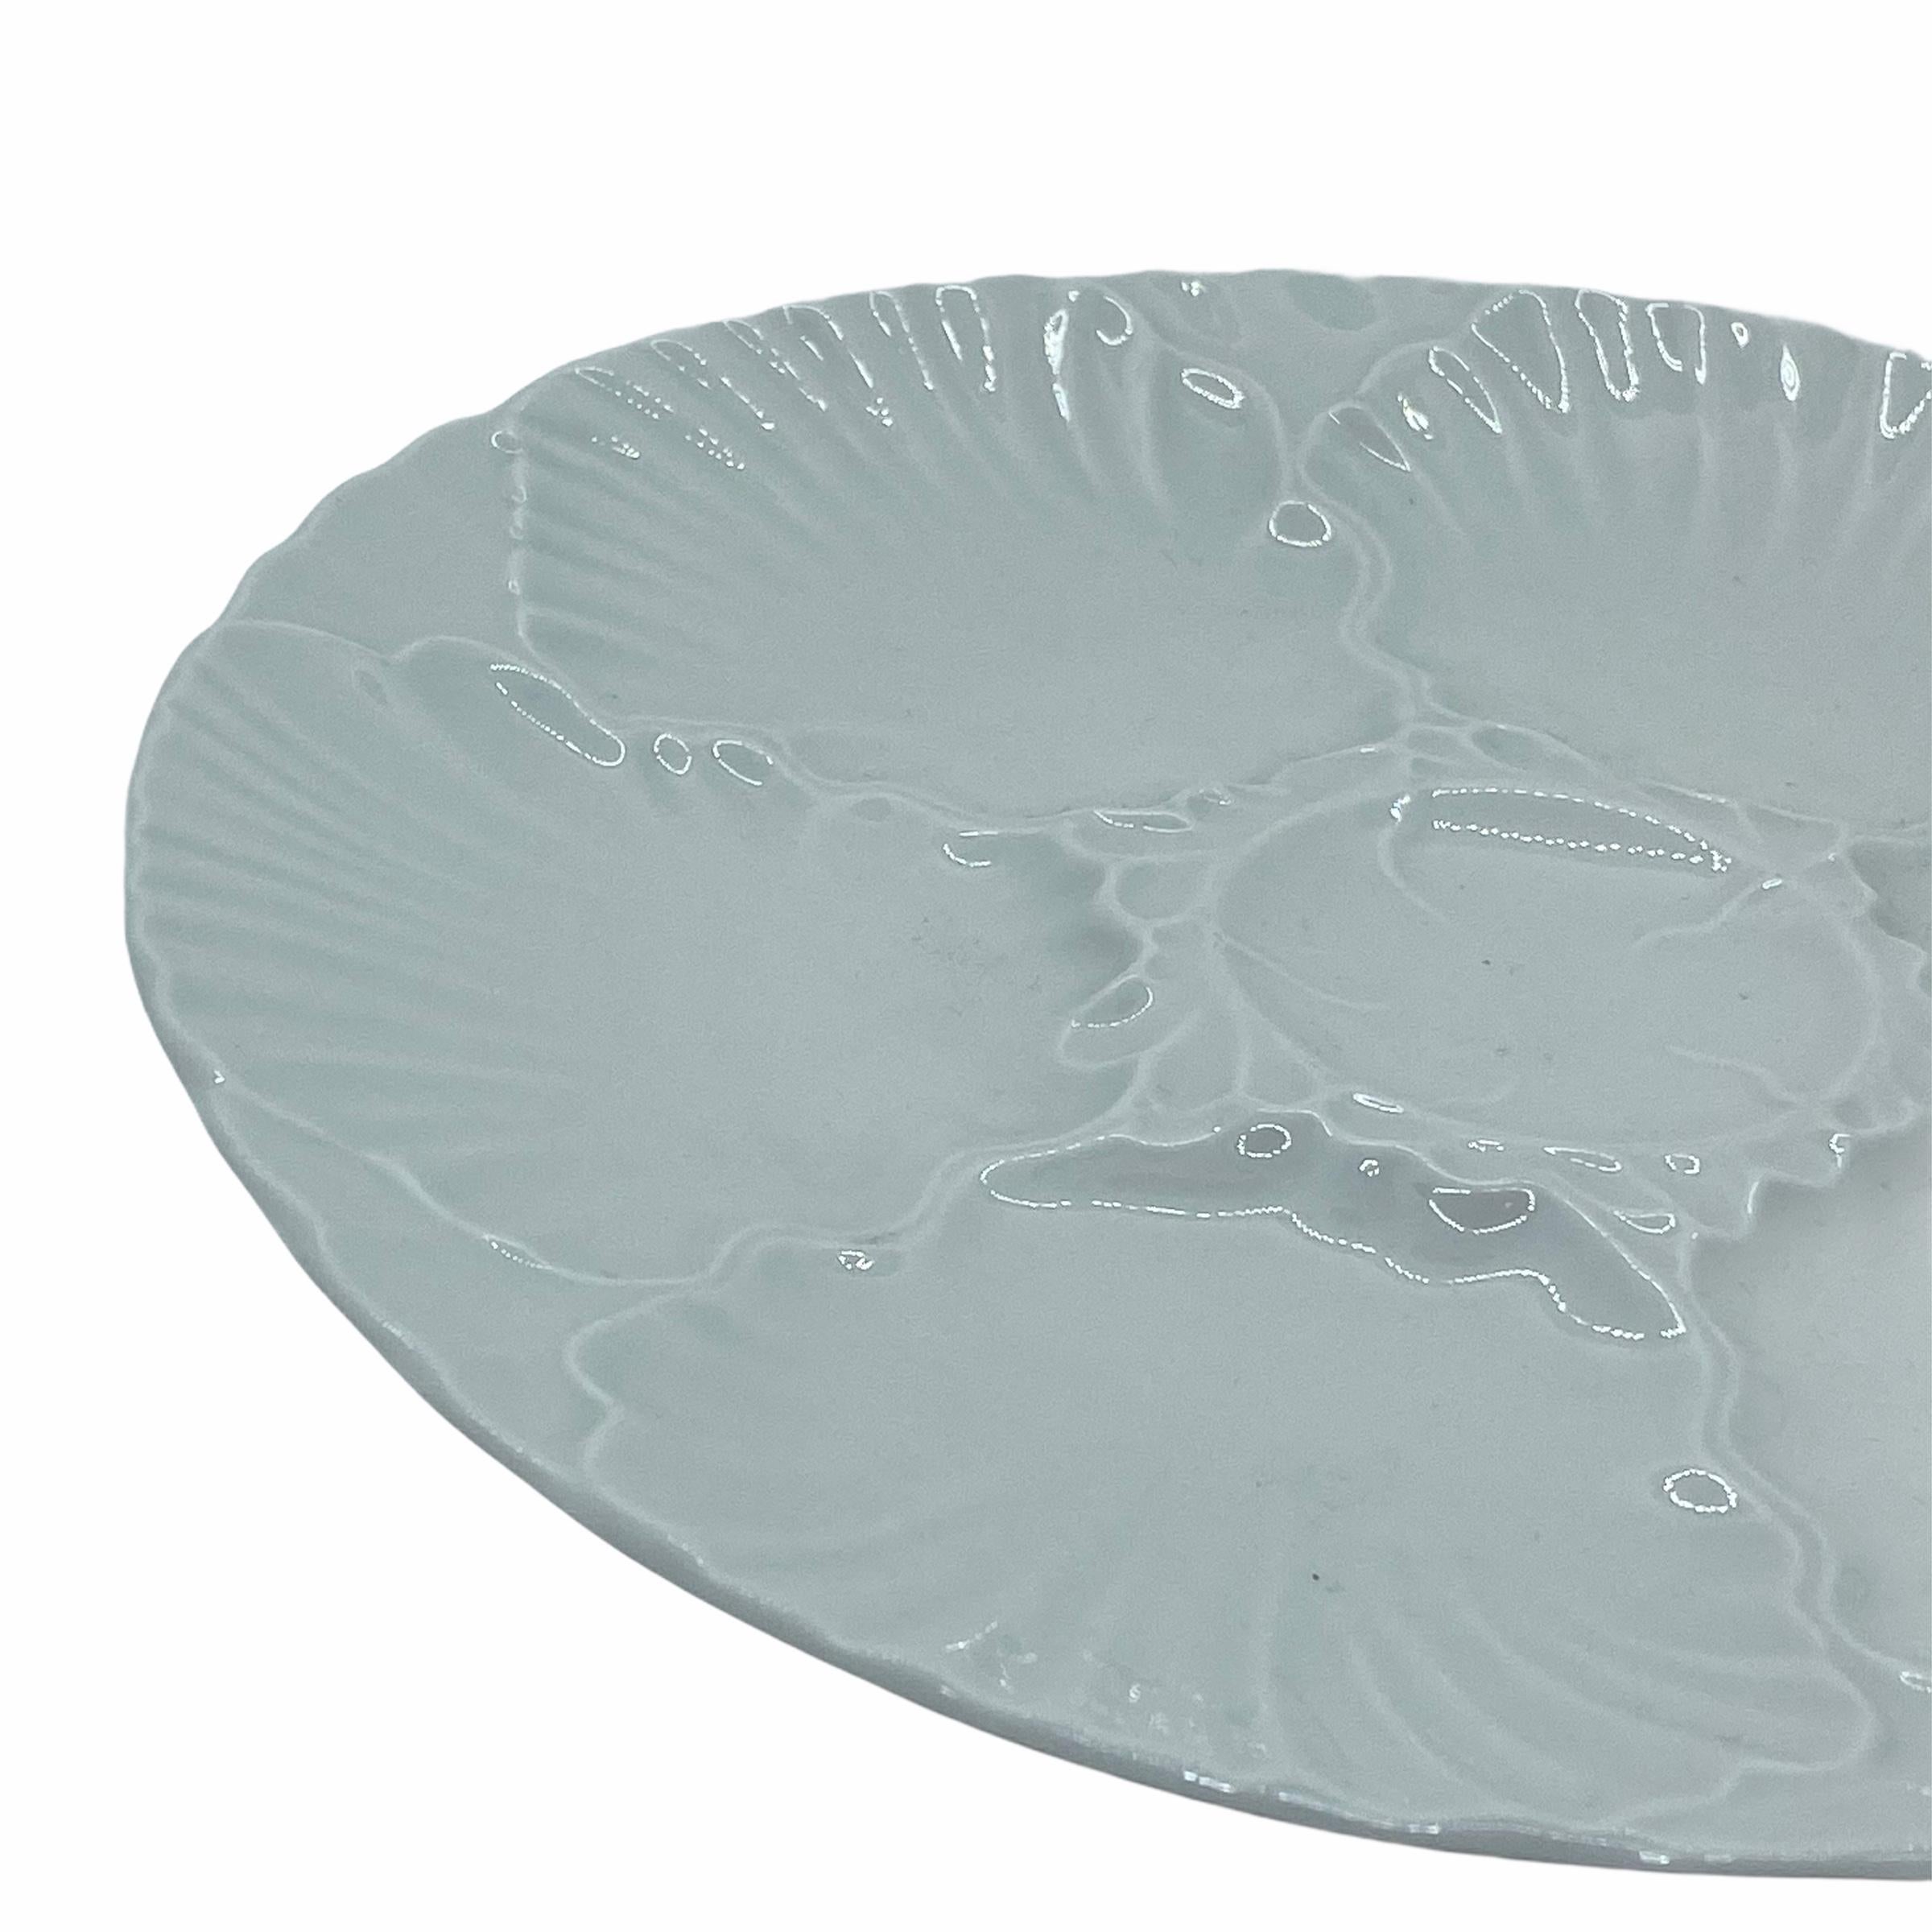 Late 20th Century Mid-Century Modern Porcelain Oyster Plate Bareuther, Germany